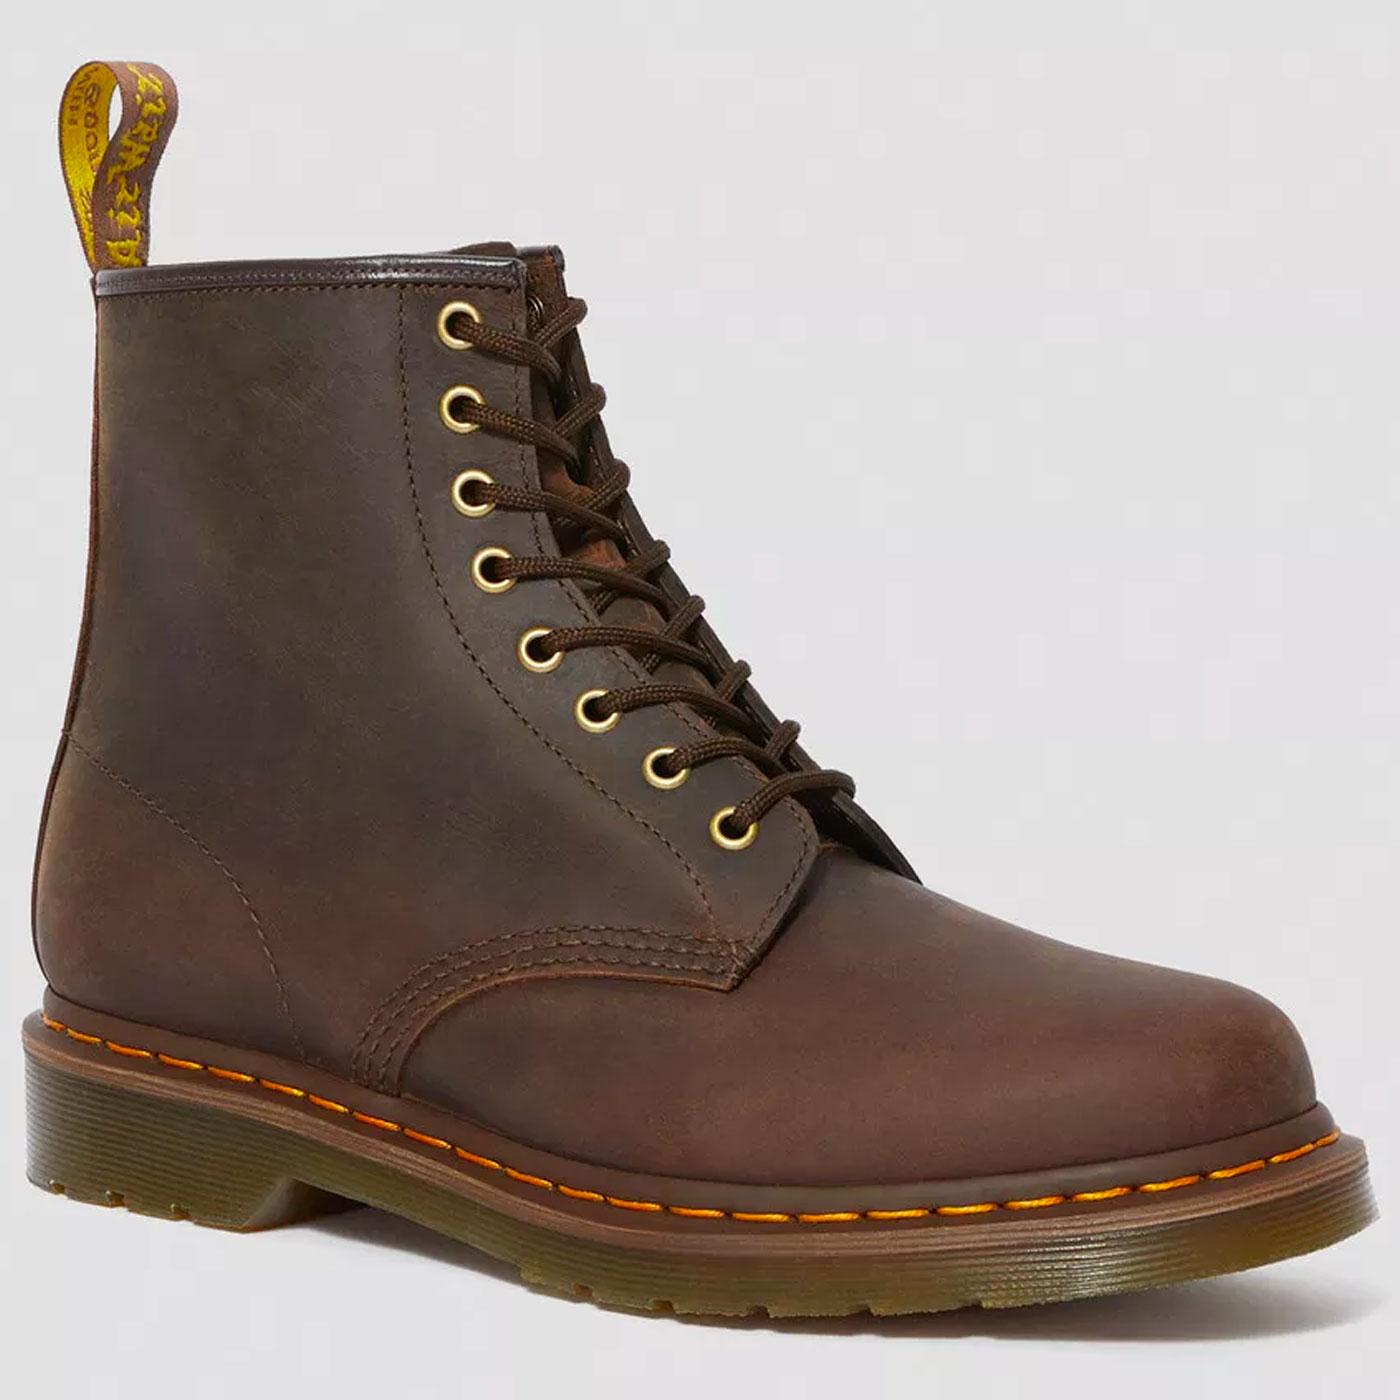 1460 Dr Martens Crazy Horse Leather Mod Boots DB